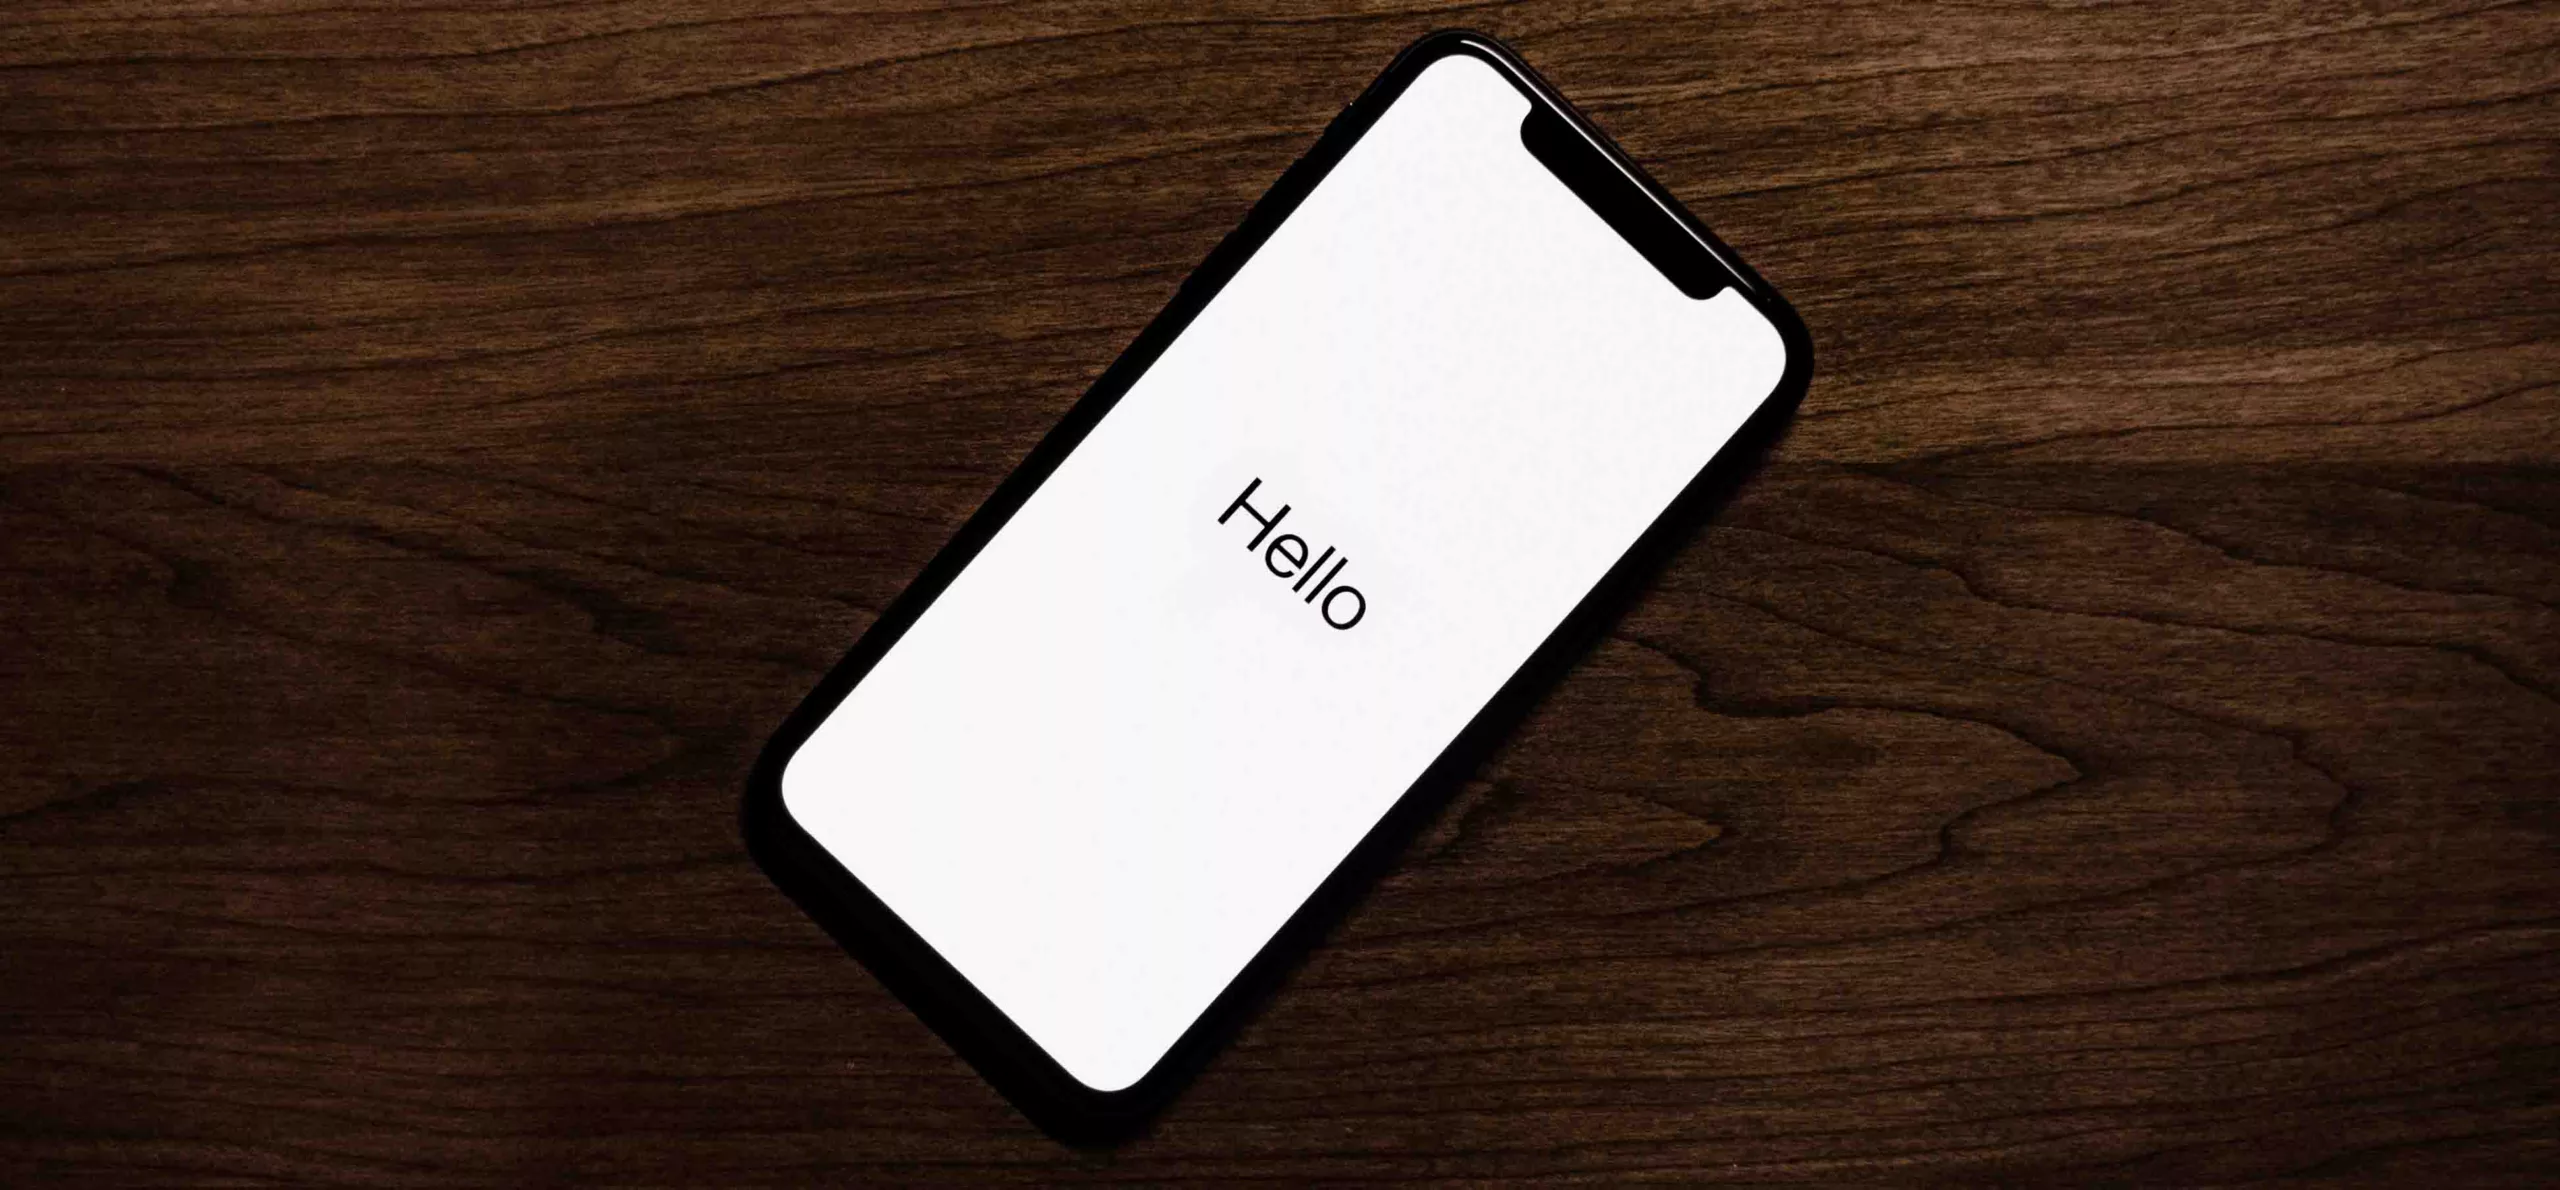 Smartphone with 'Hello' on screen placed on a wooden table.